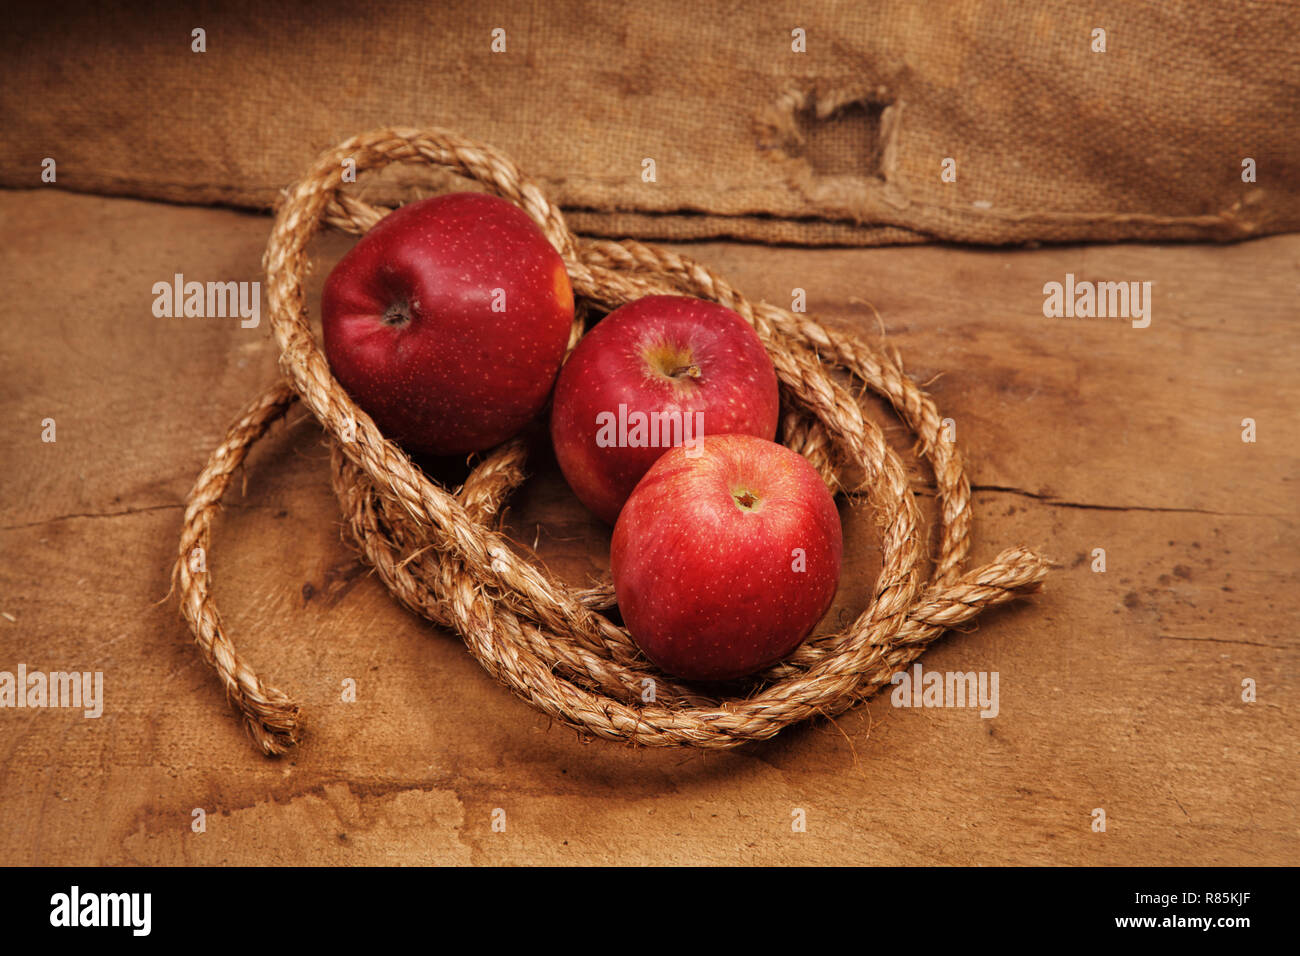 Red apple and green apple in basket with burlap background texture